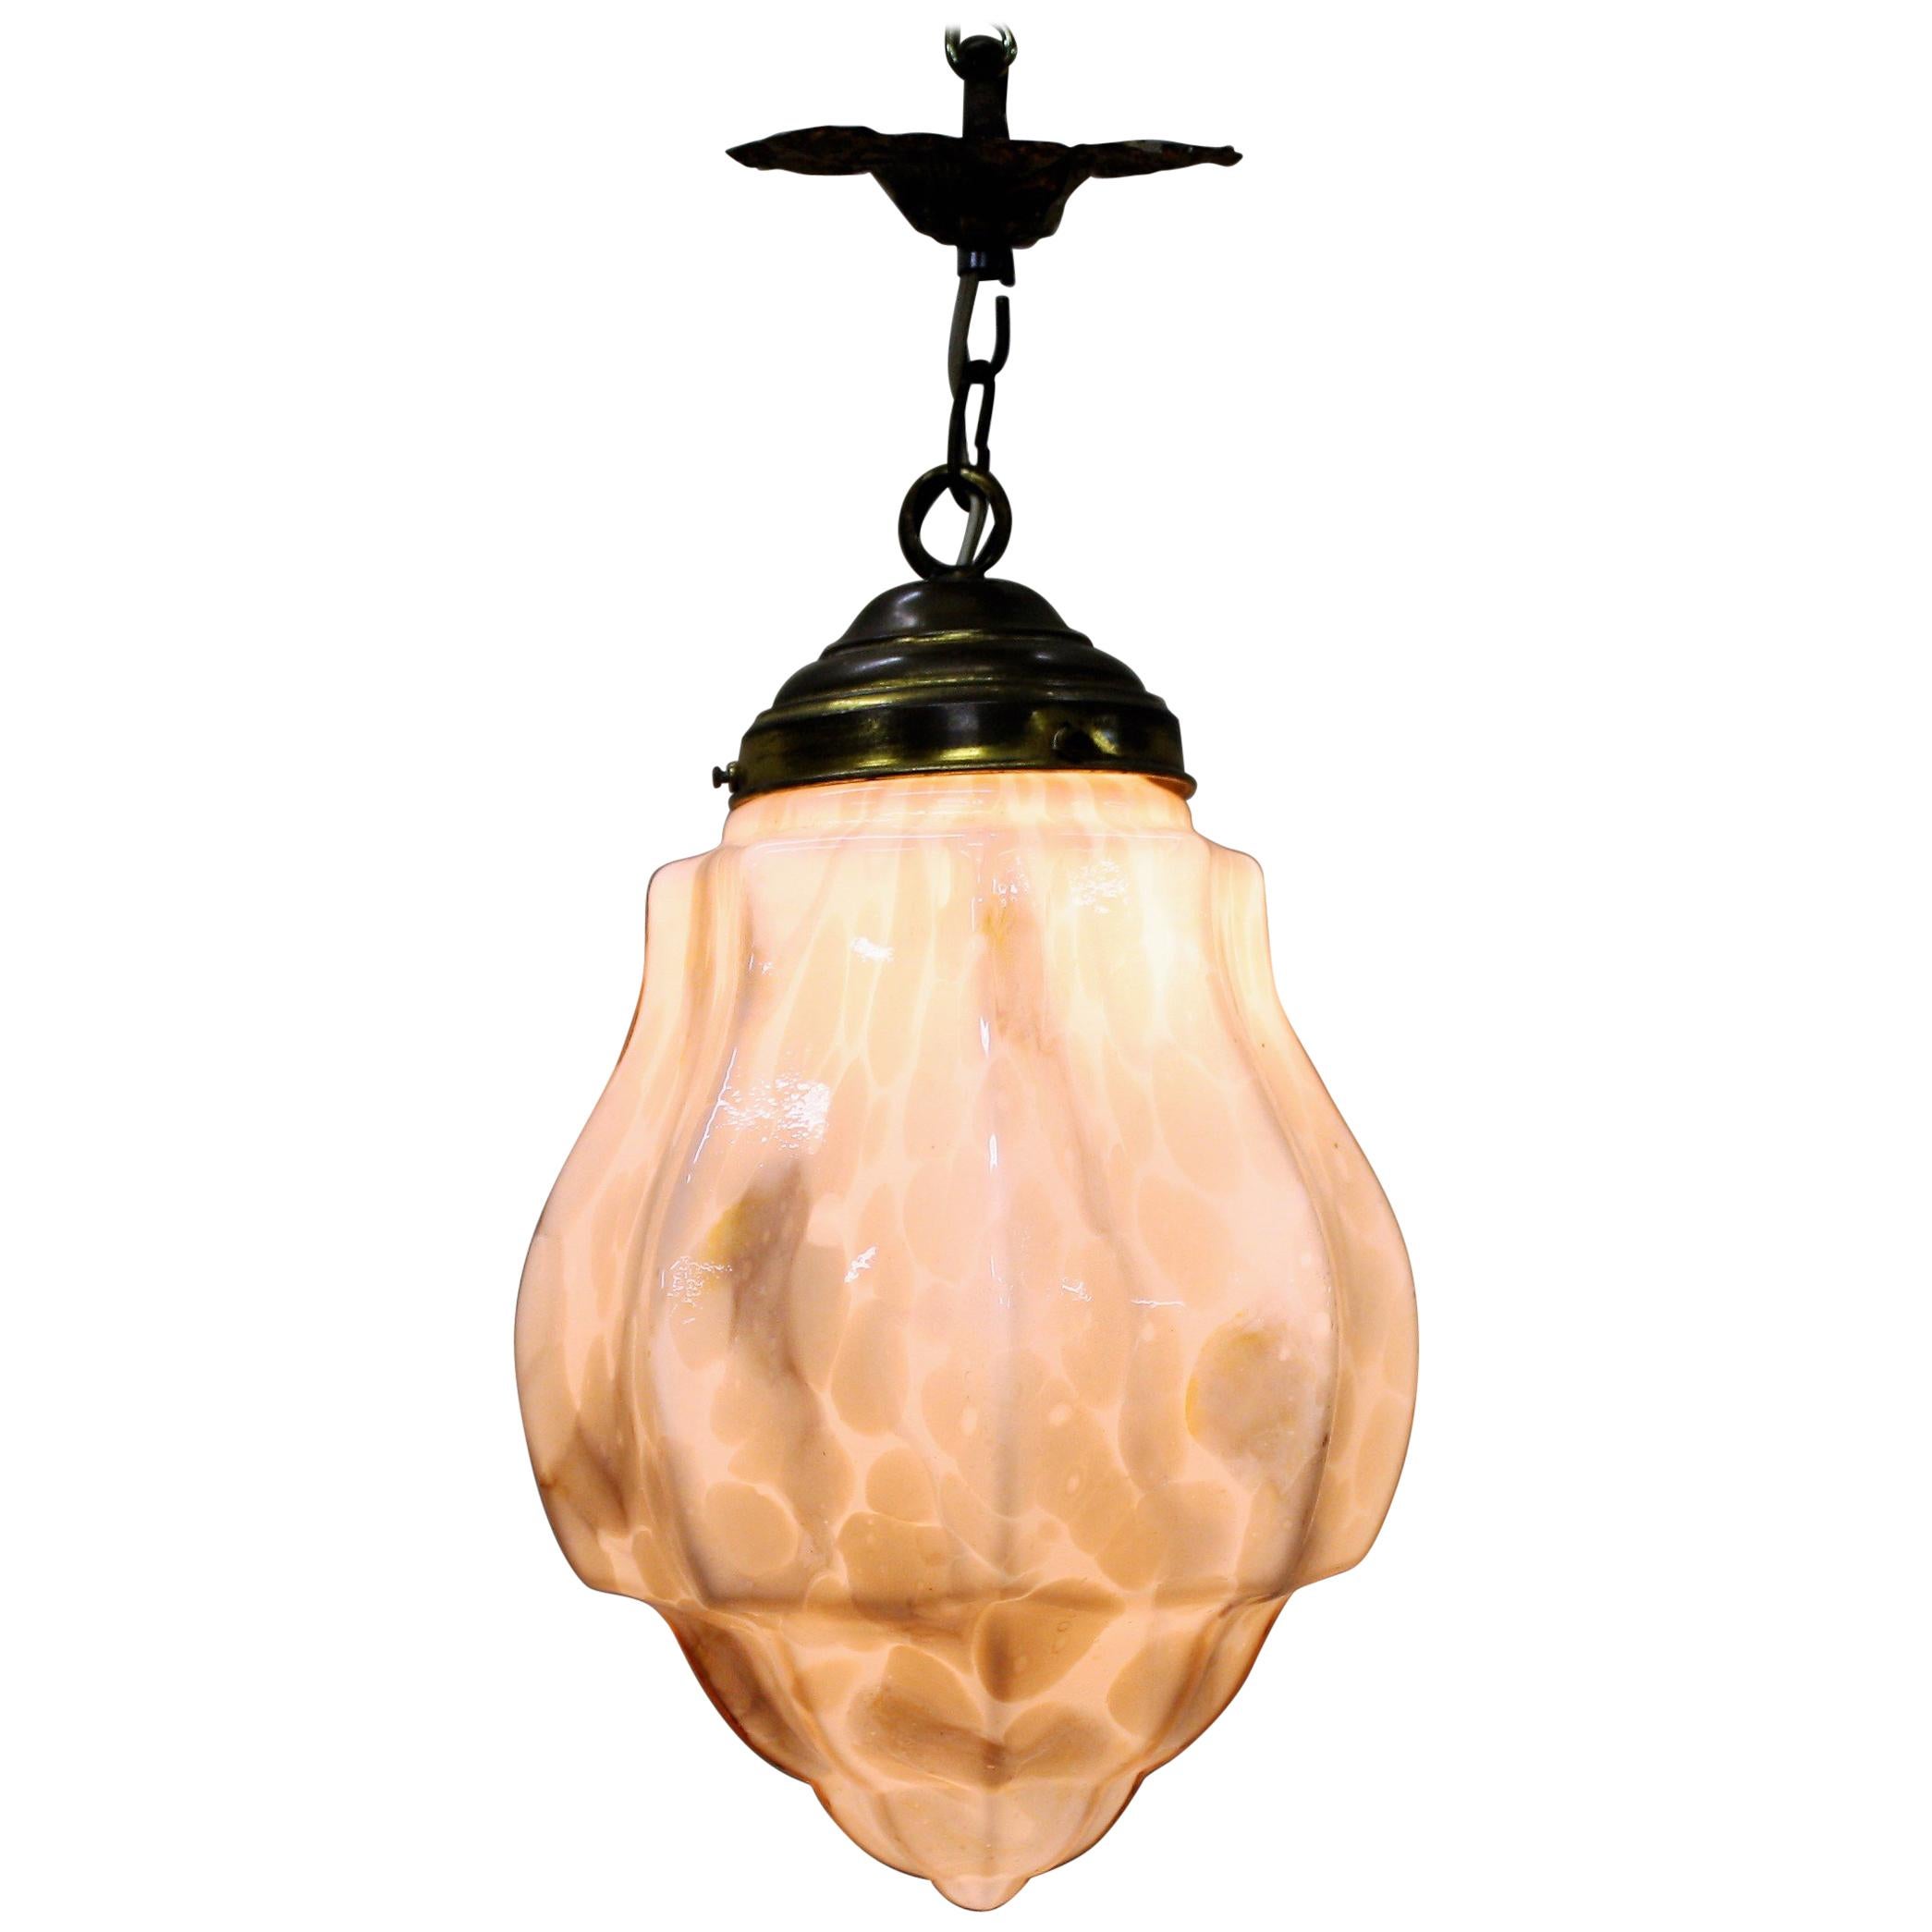 Pink Art Deco Pendant Light with Marbled Glass, 1930s